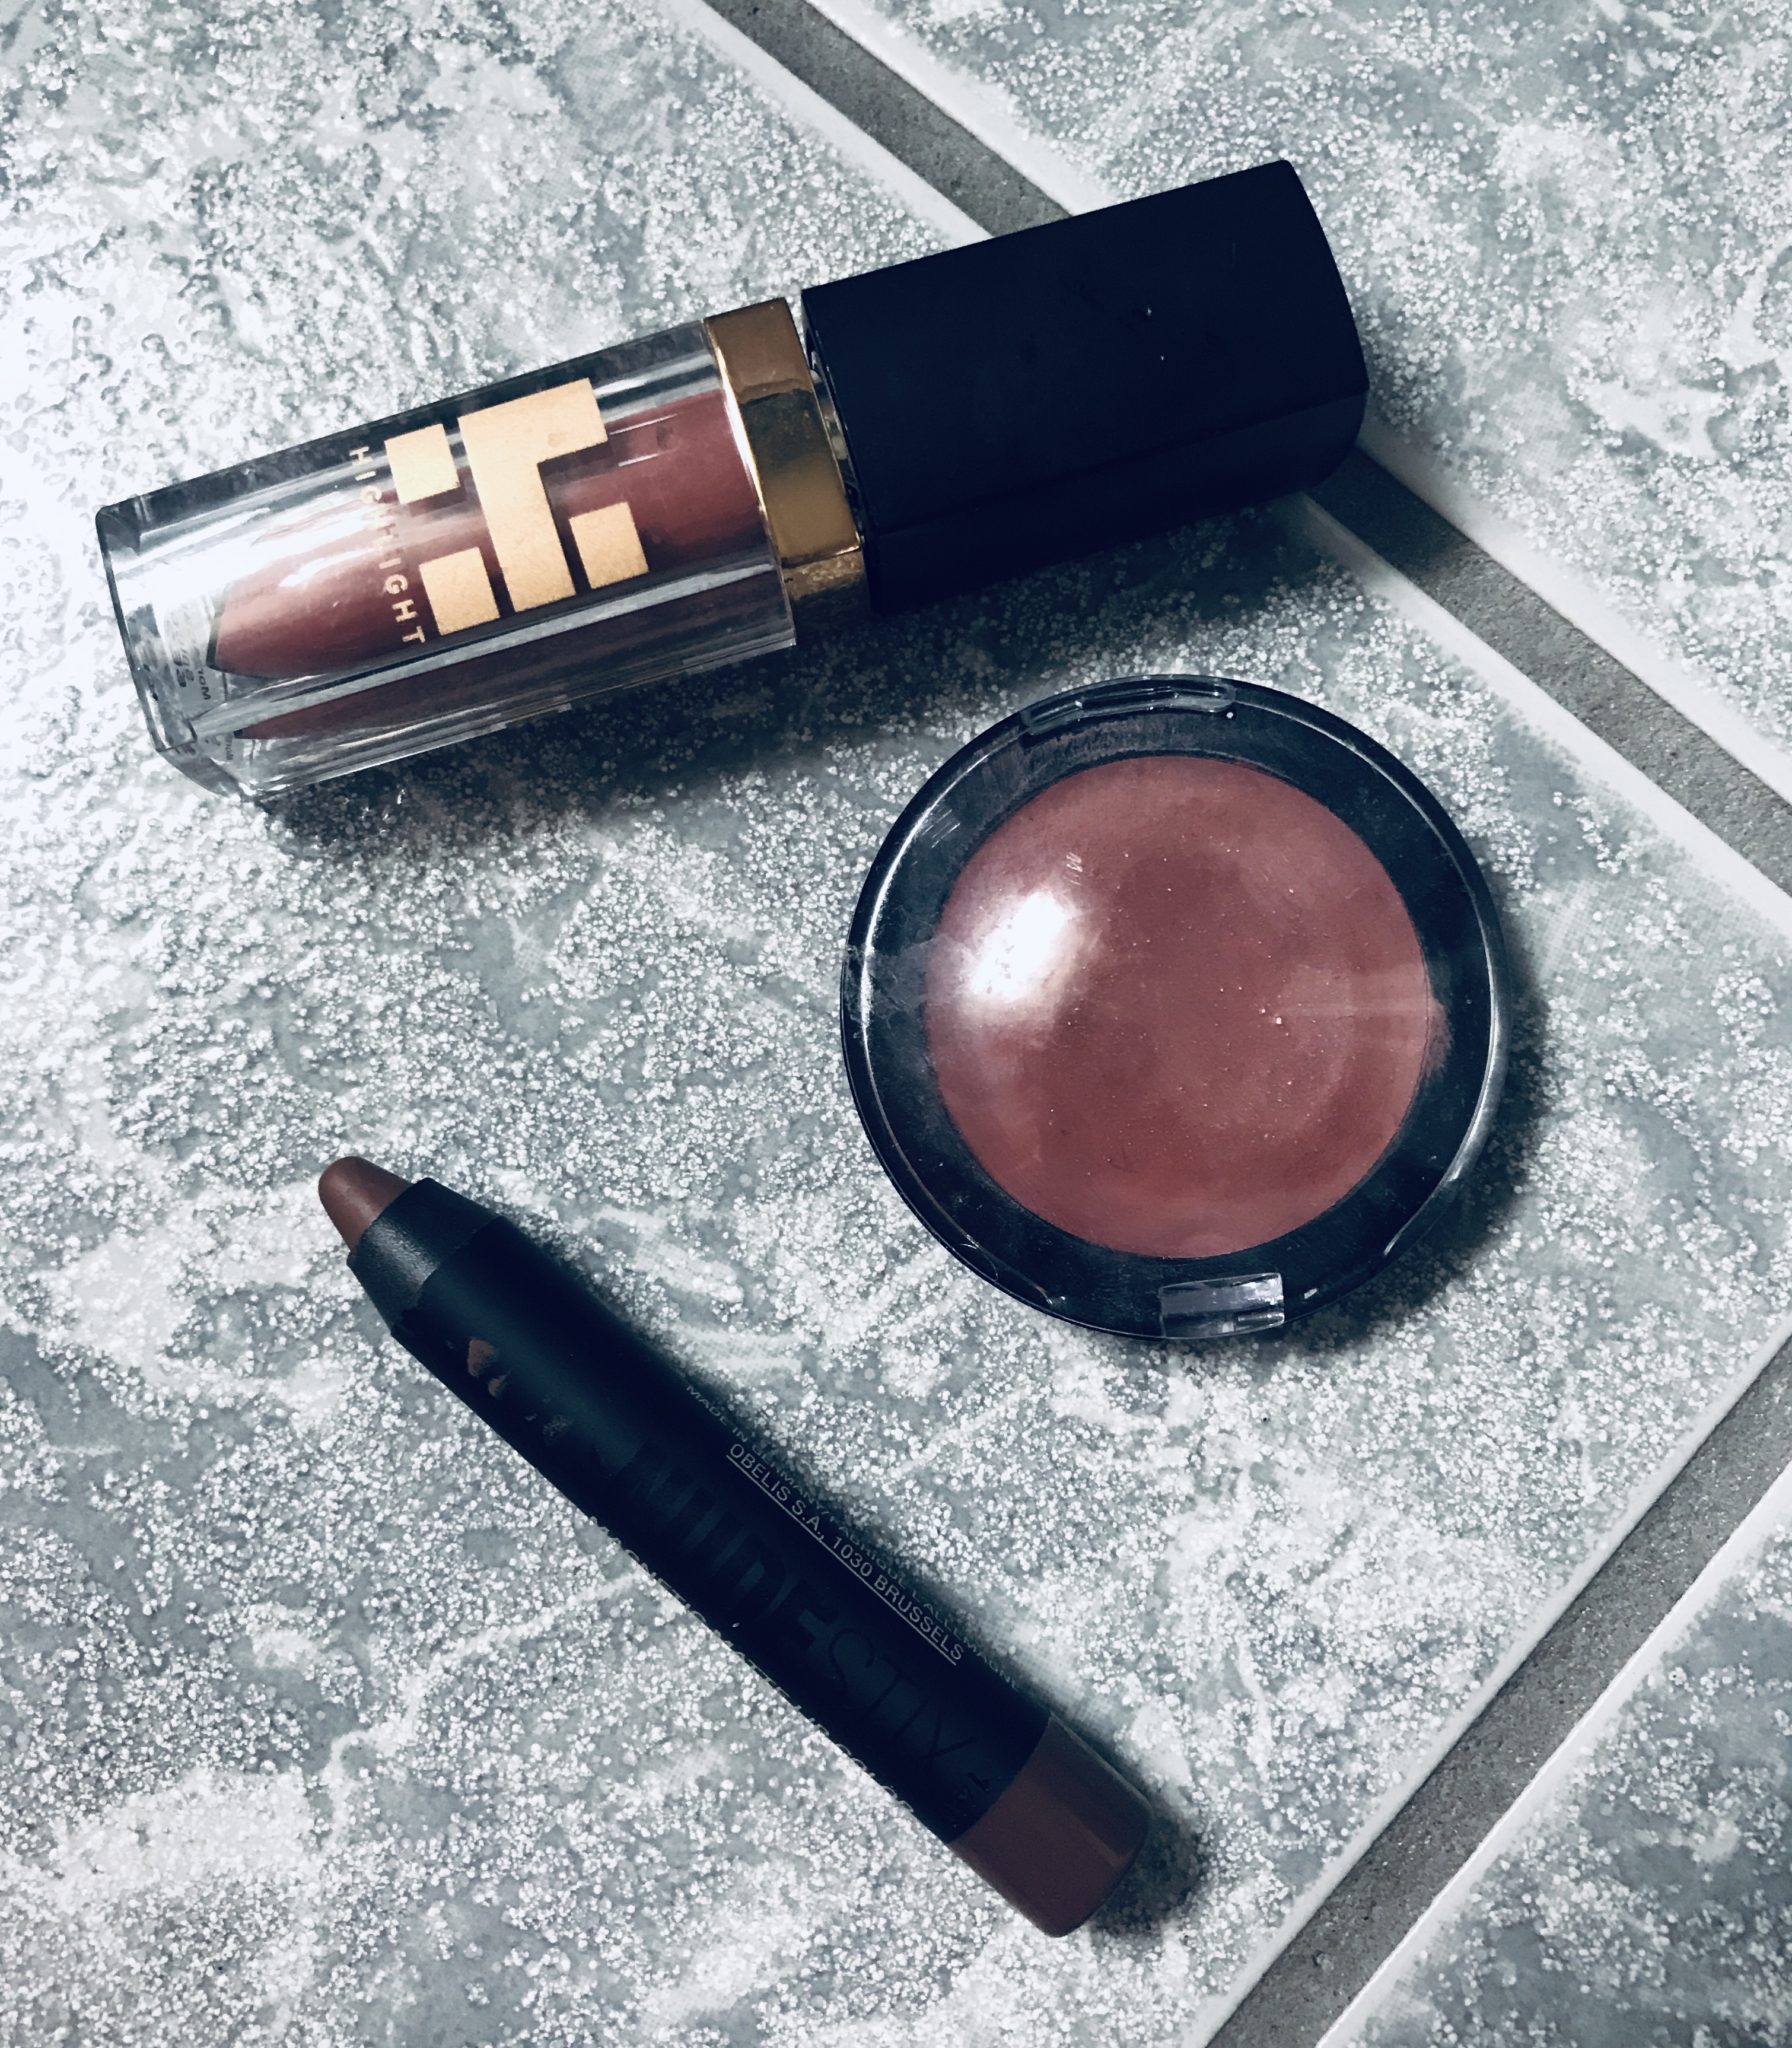 expired and unused makeup that I am recycling in November 2019